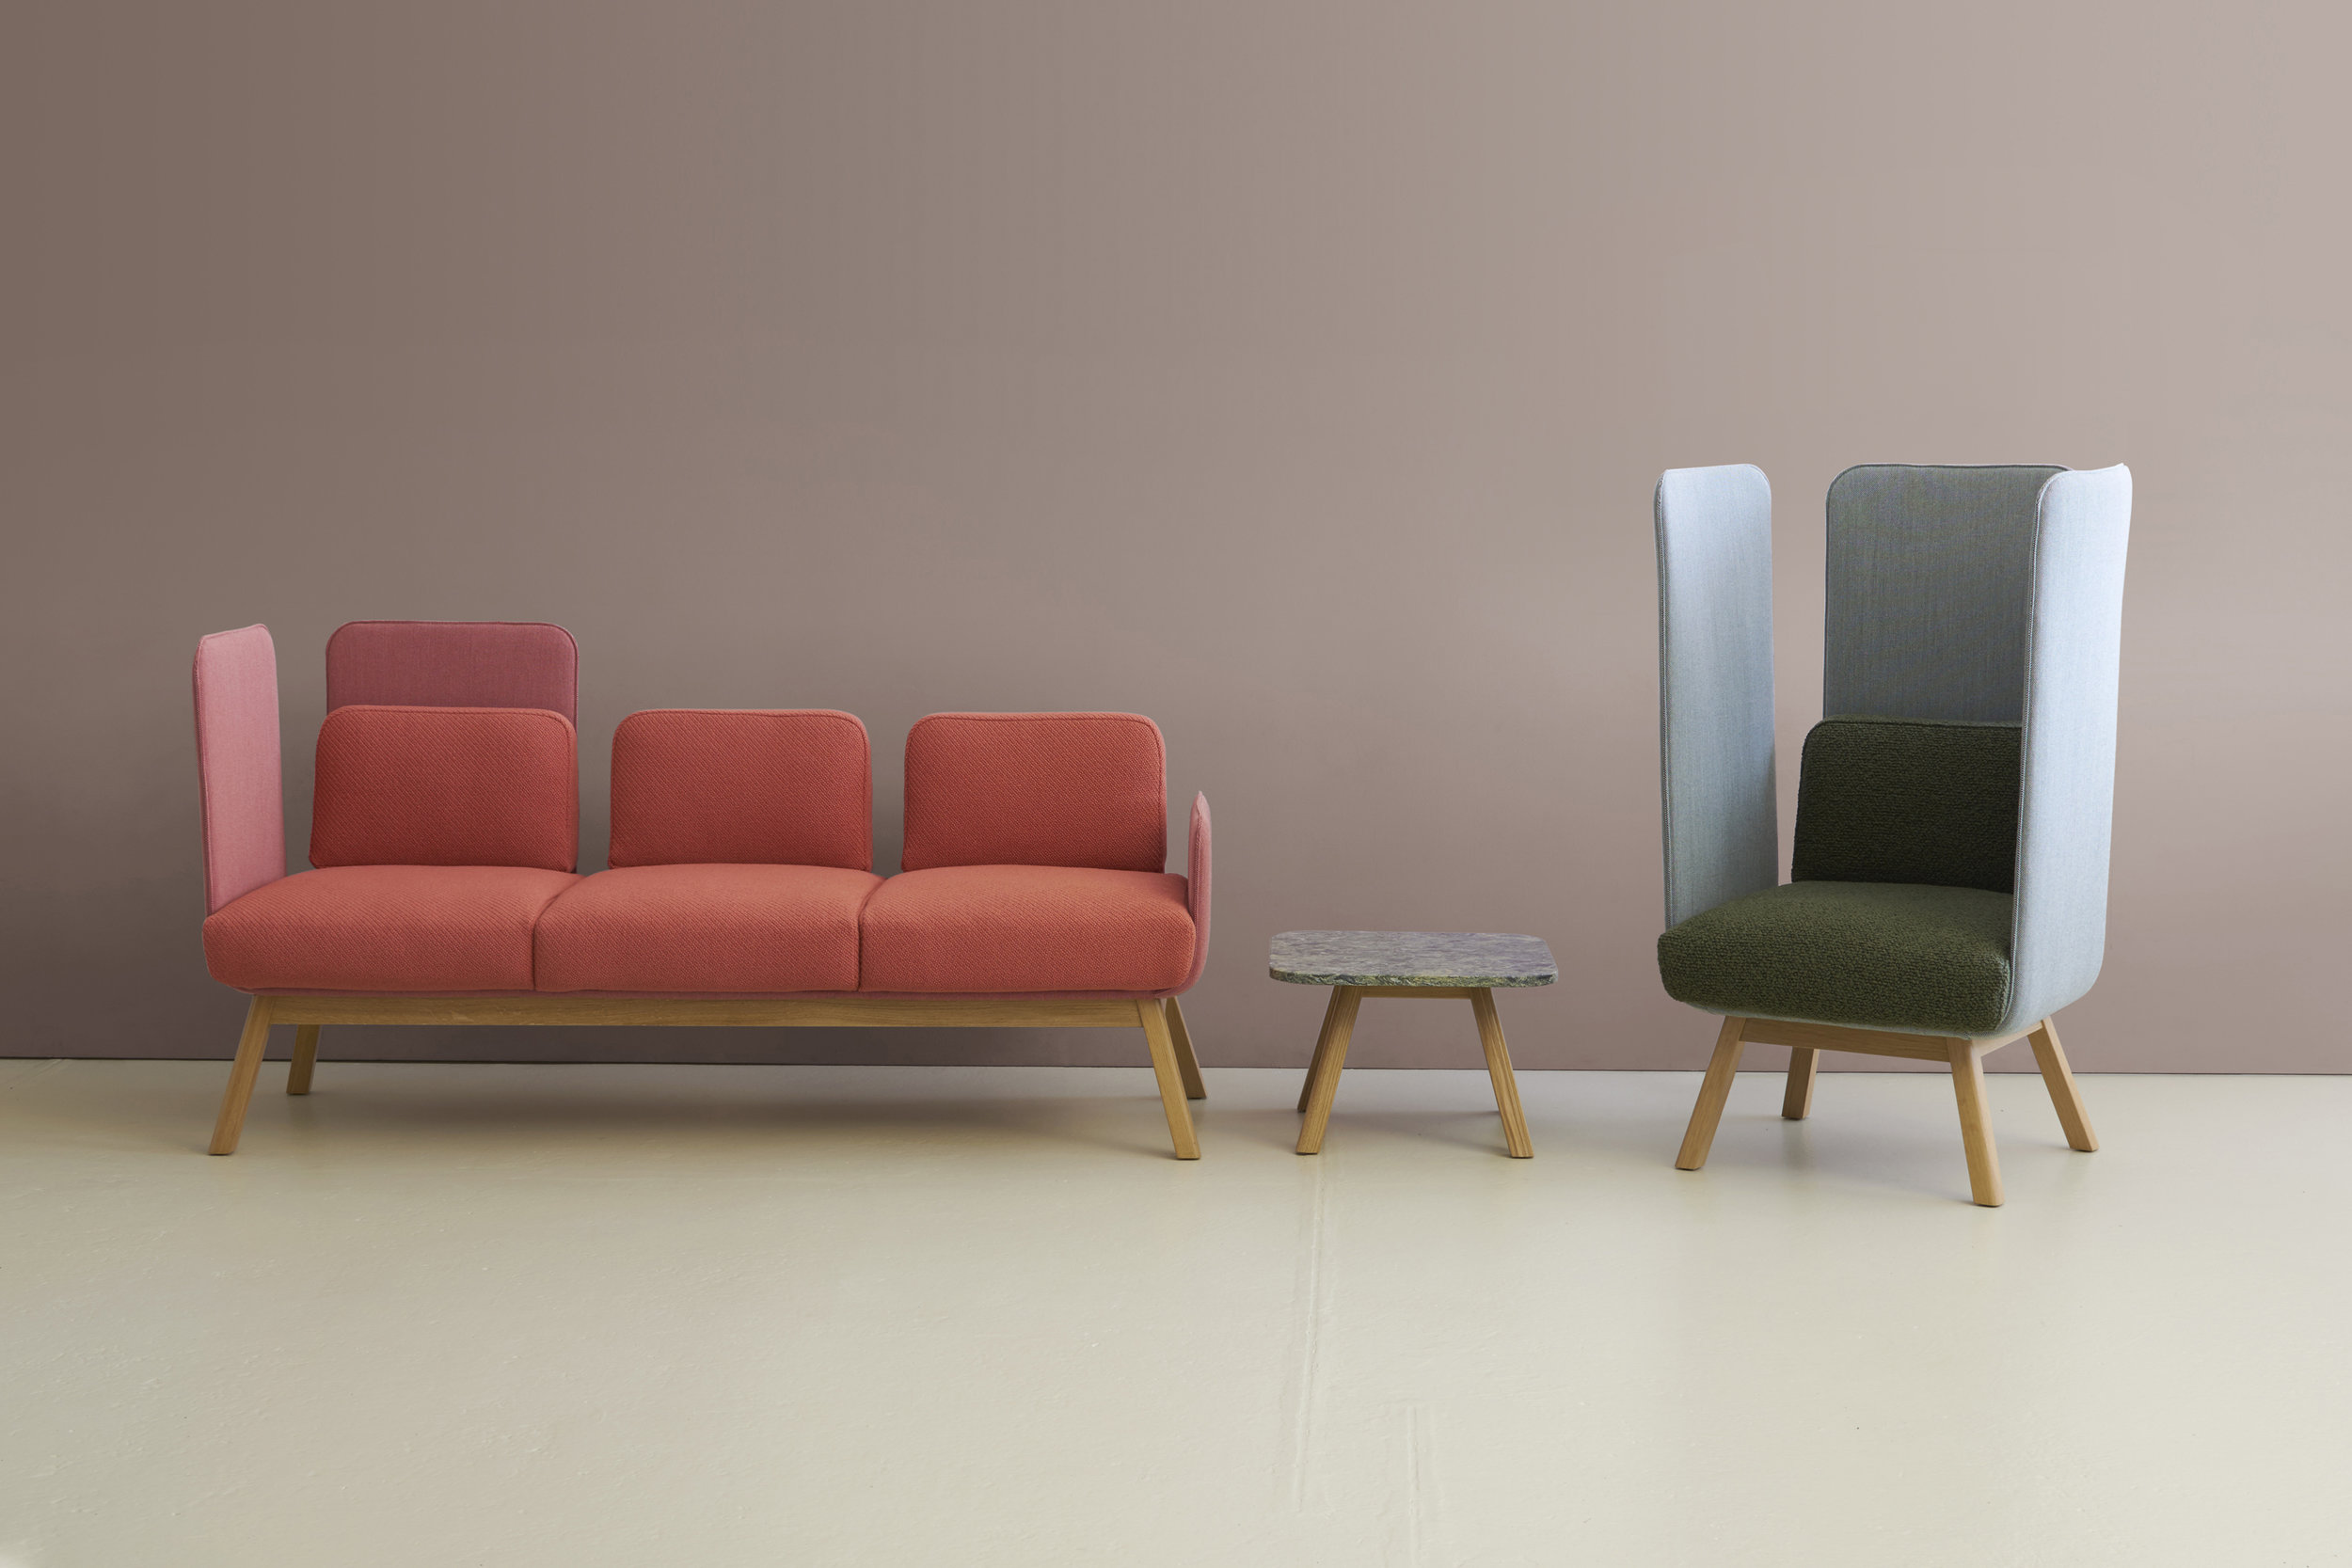 hm10w sofa, hm10g chair with hm10y3 table (full background).jpg